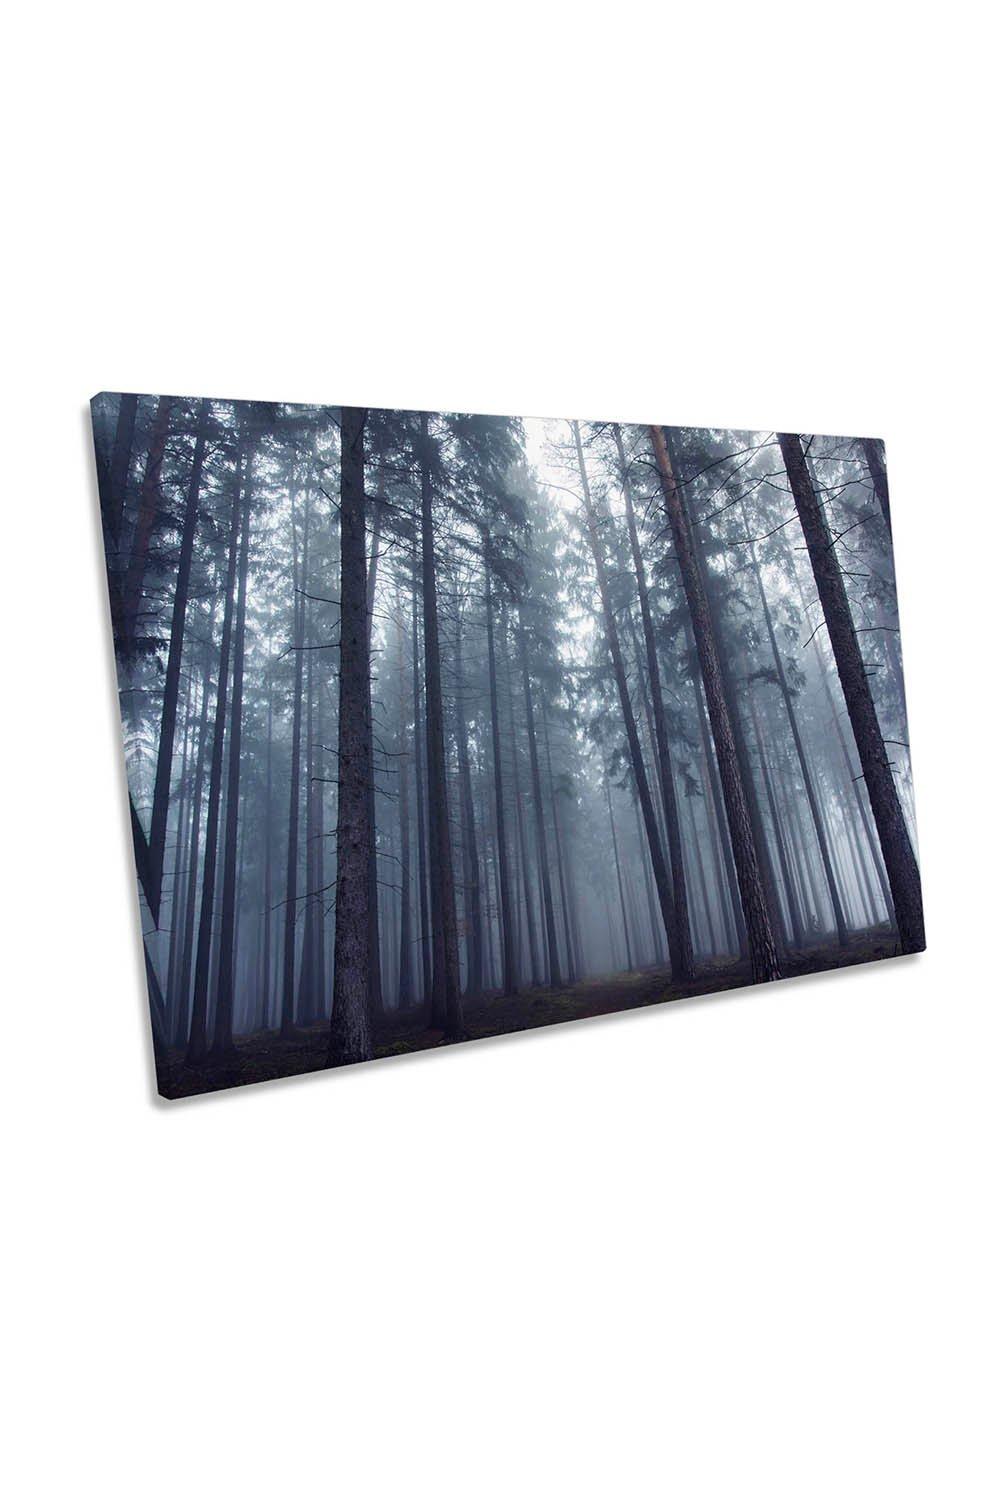 Mysterious Foggy Forest Landscape Canvas Wall Art Picture Print